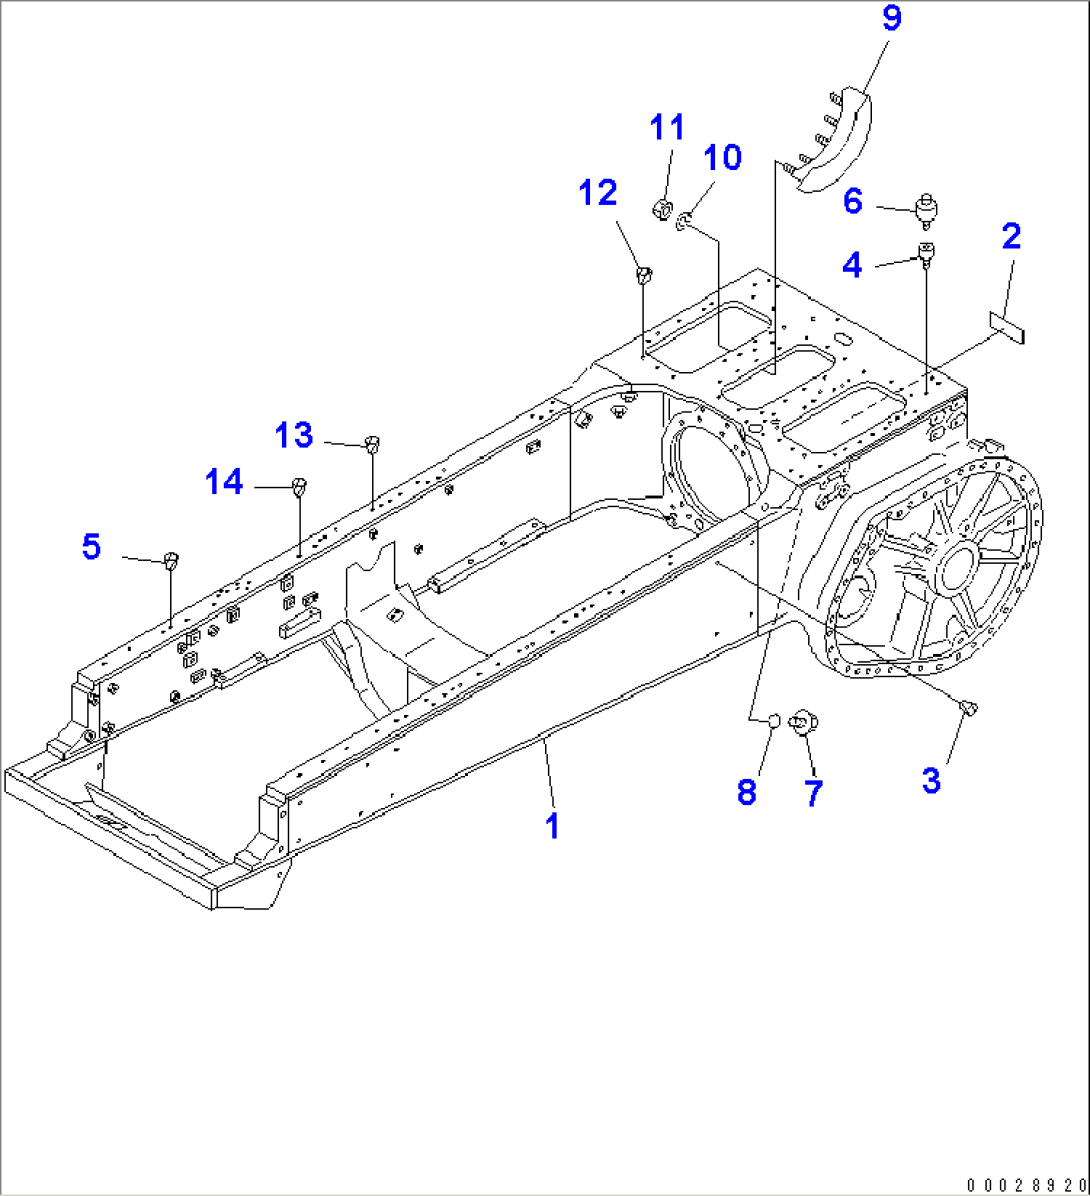 STEERING CASE AND MAIN FRAME (JUNGLE SPEC.)